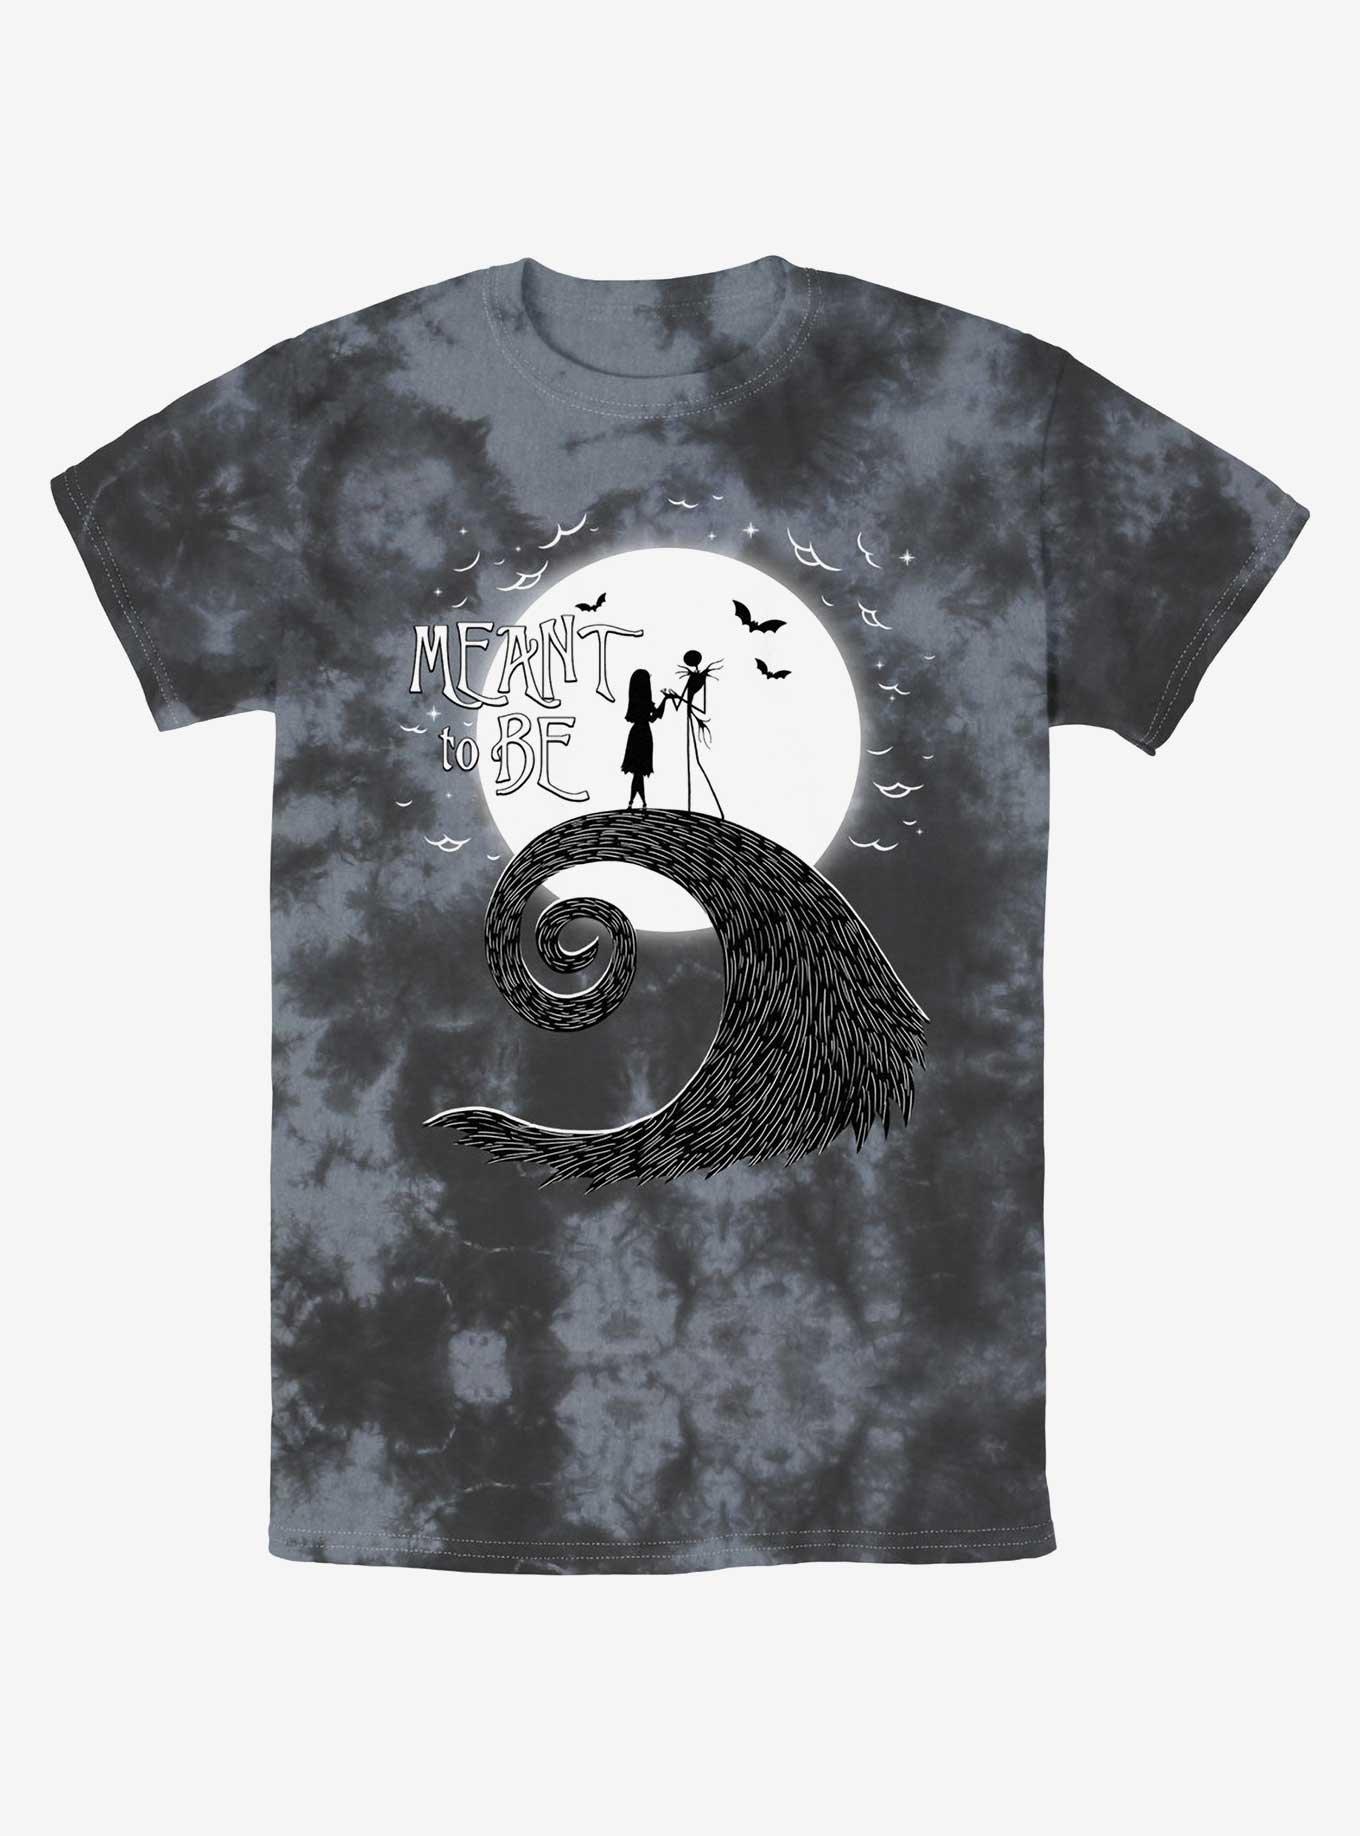 Disney The Nightmare Before Christmas Jack and Sally Meant To Be Tie-Dye T-Shirt, BLKCHAR, hi-res